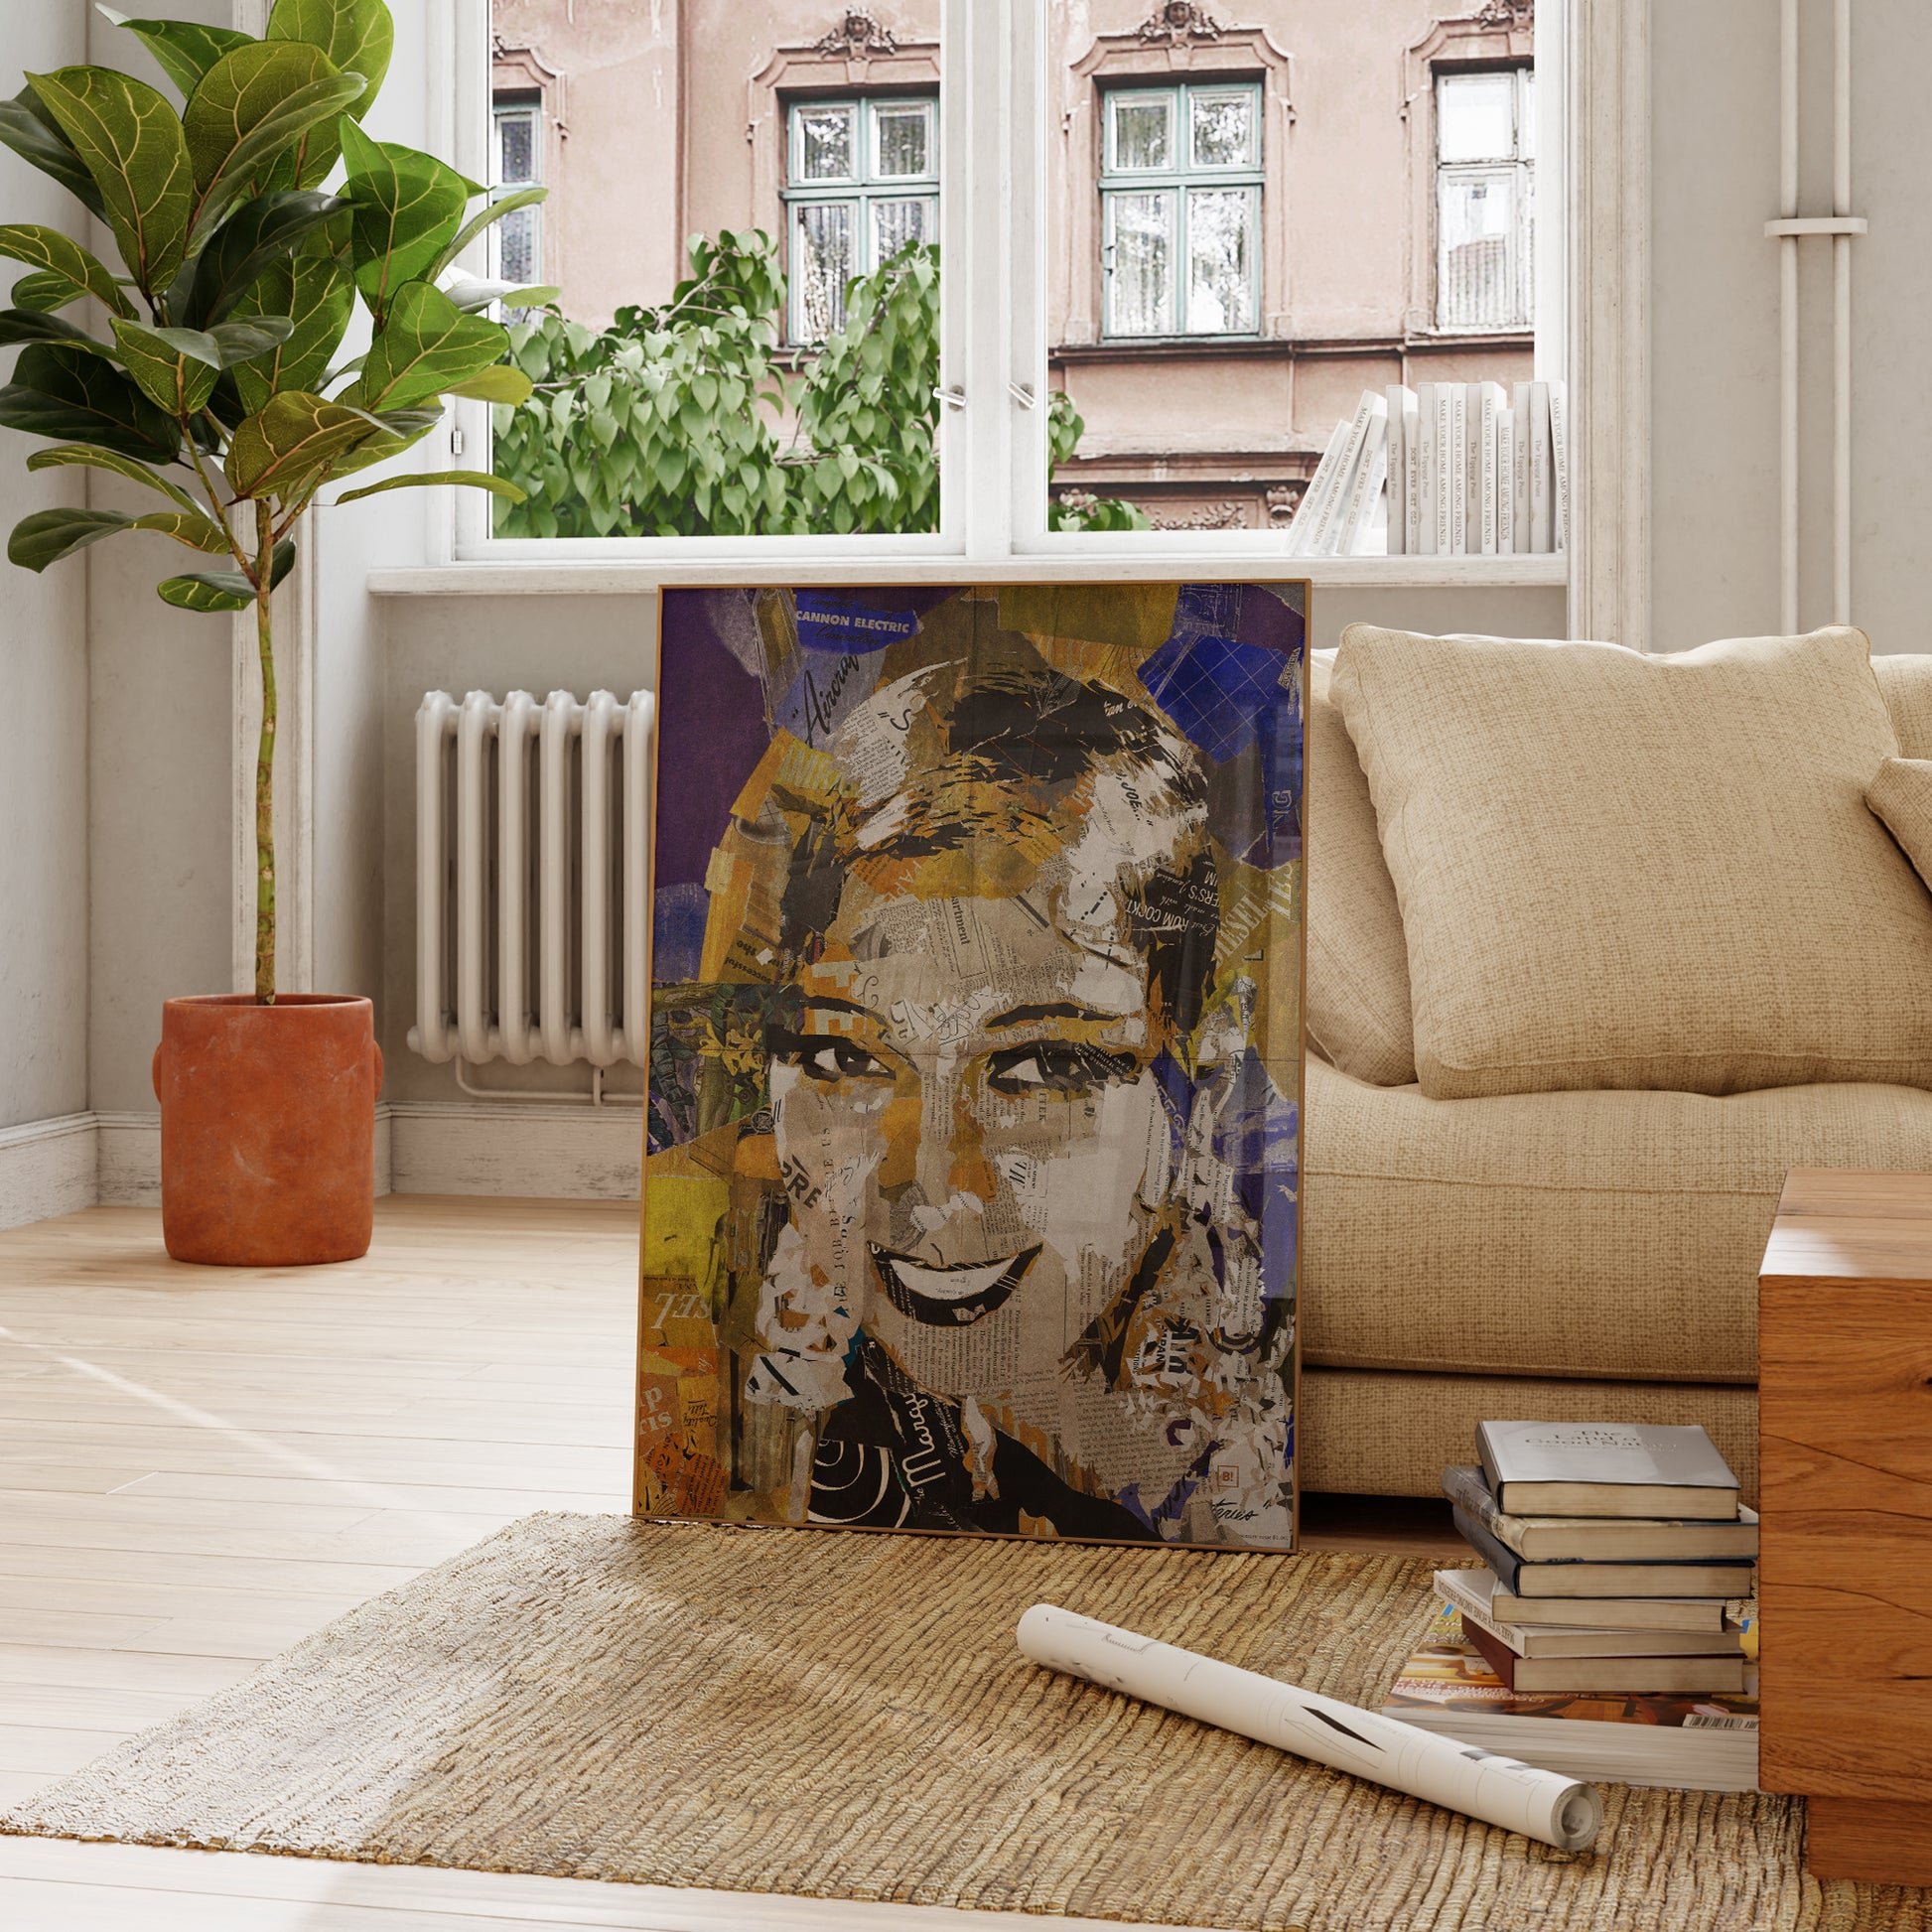 Be inspired by our iconic collage portrait art print of Josephine Baker. This artwork was printed using the giclée process on archival acid-free paper and is presented in a French living room, capturing its timeless beauty in every detail.